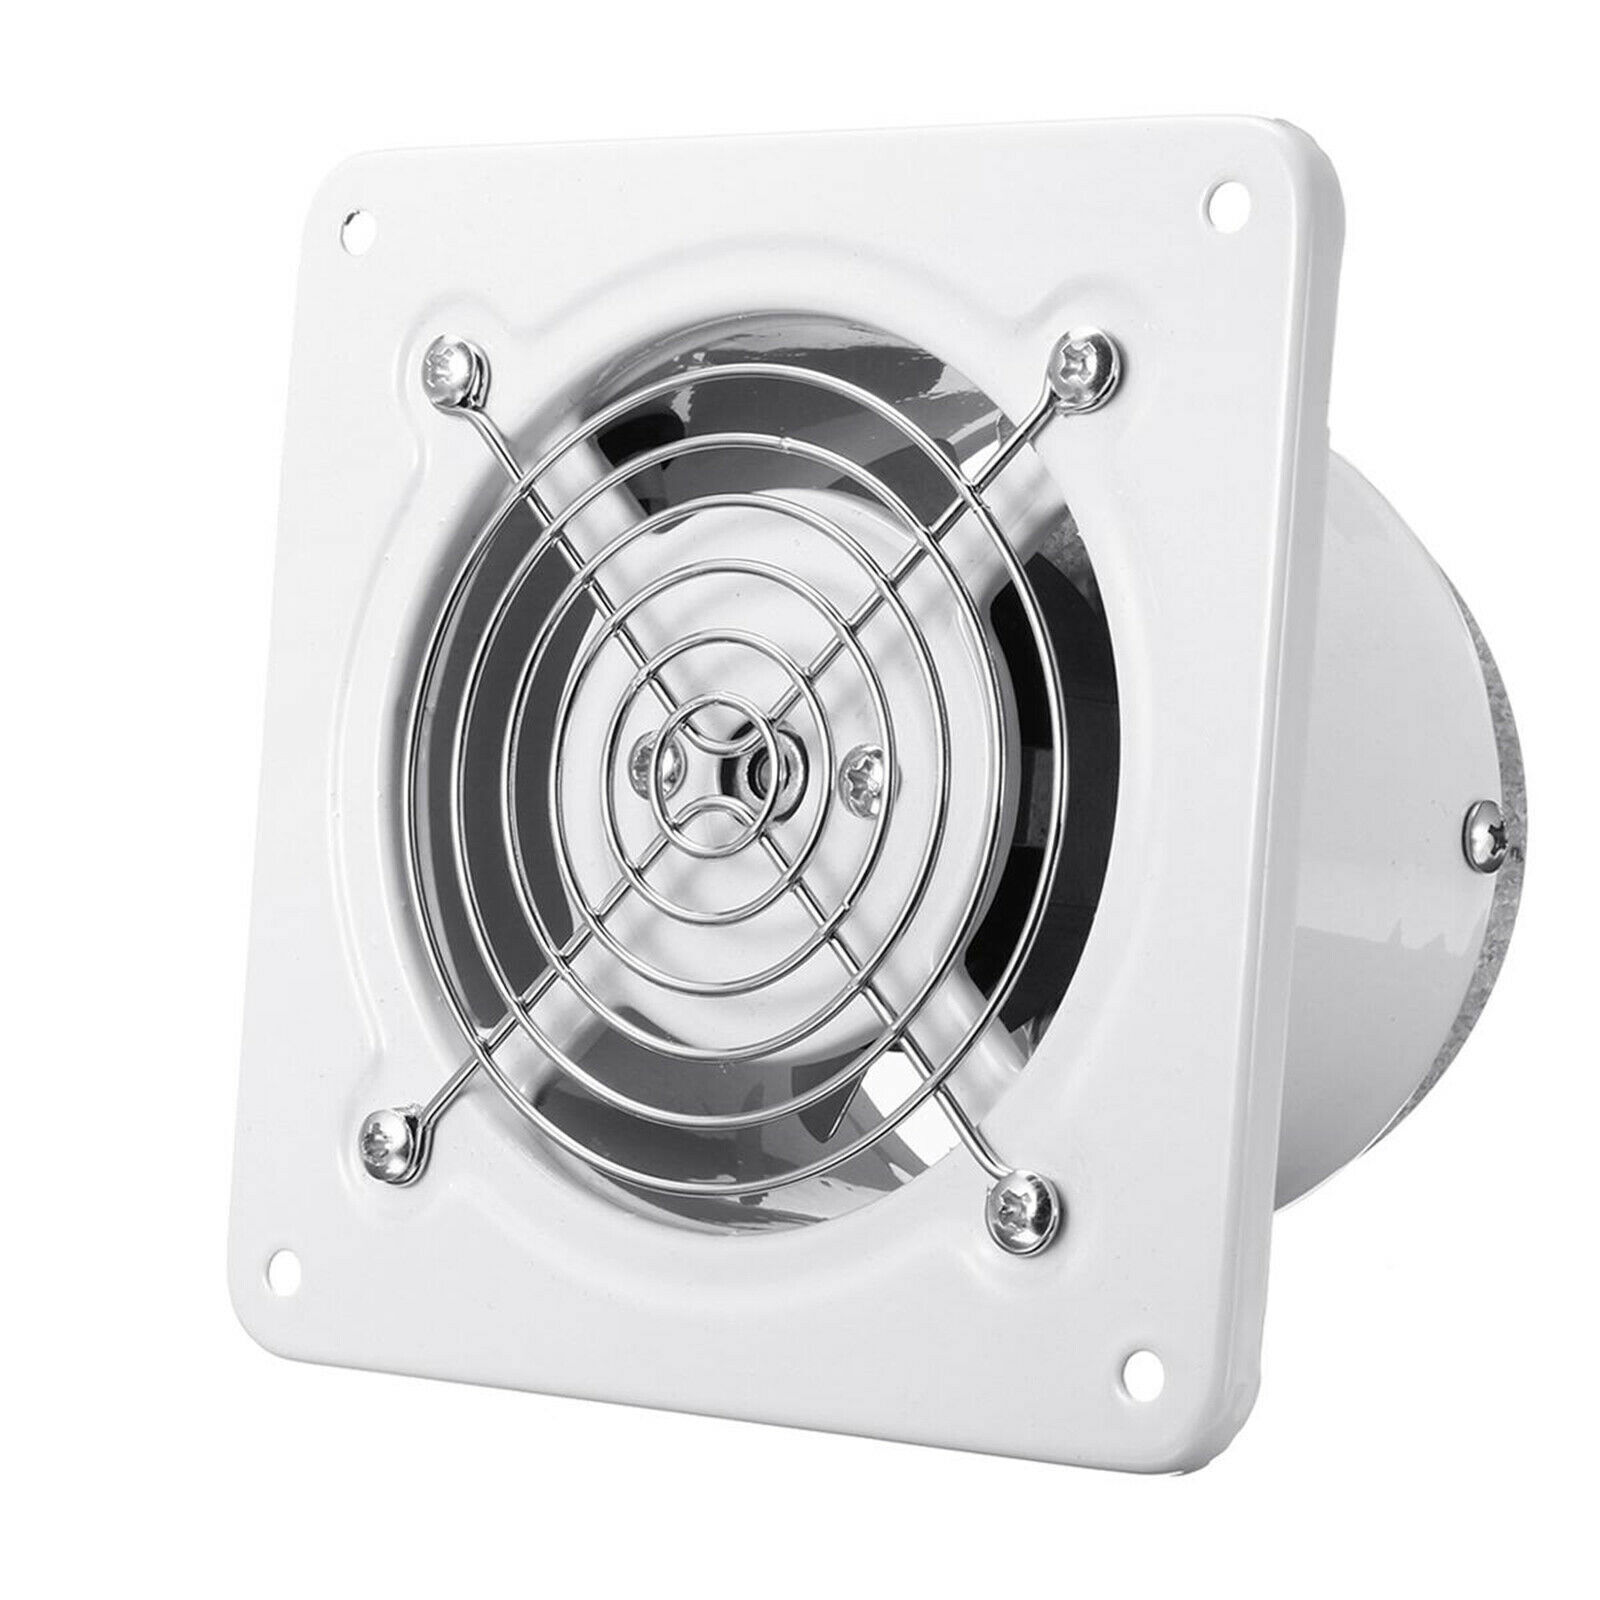 6 Inch Extractor Fan Exhaust Fan Ventilation Square 110V Wall-Mounted Blower